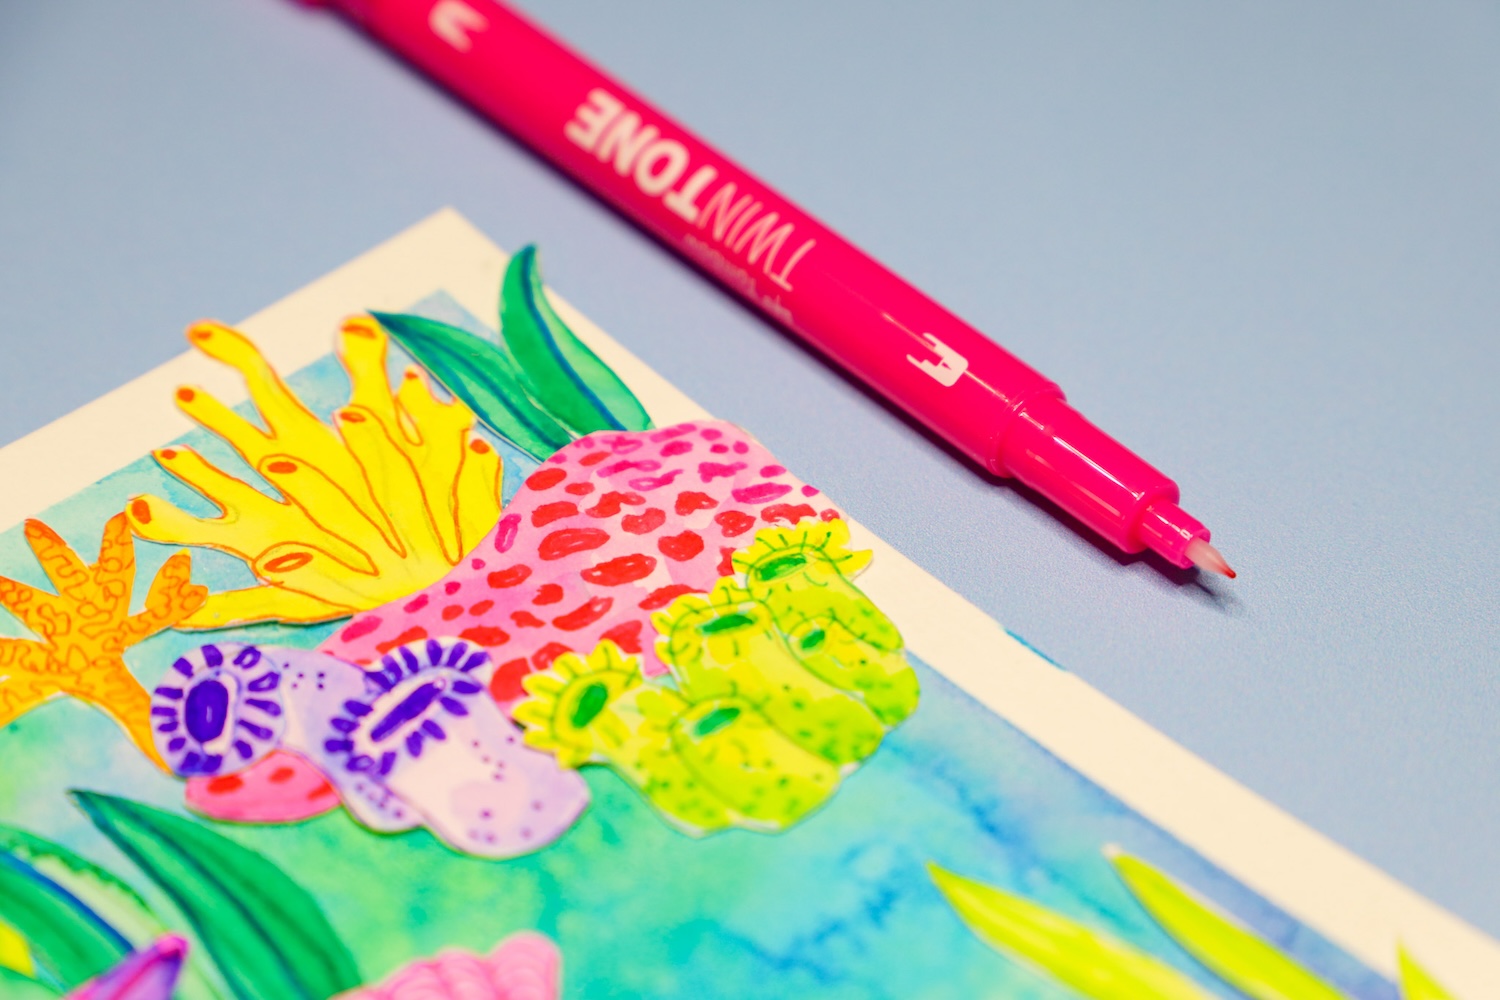 Learn how to make your own DIY Ocean Collage Art using @tombowusa Dual Brush Pens following this tutorial by @studio.katie